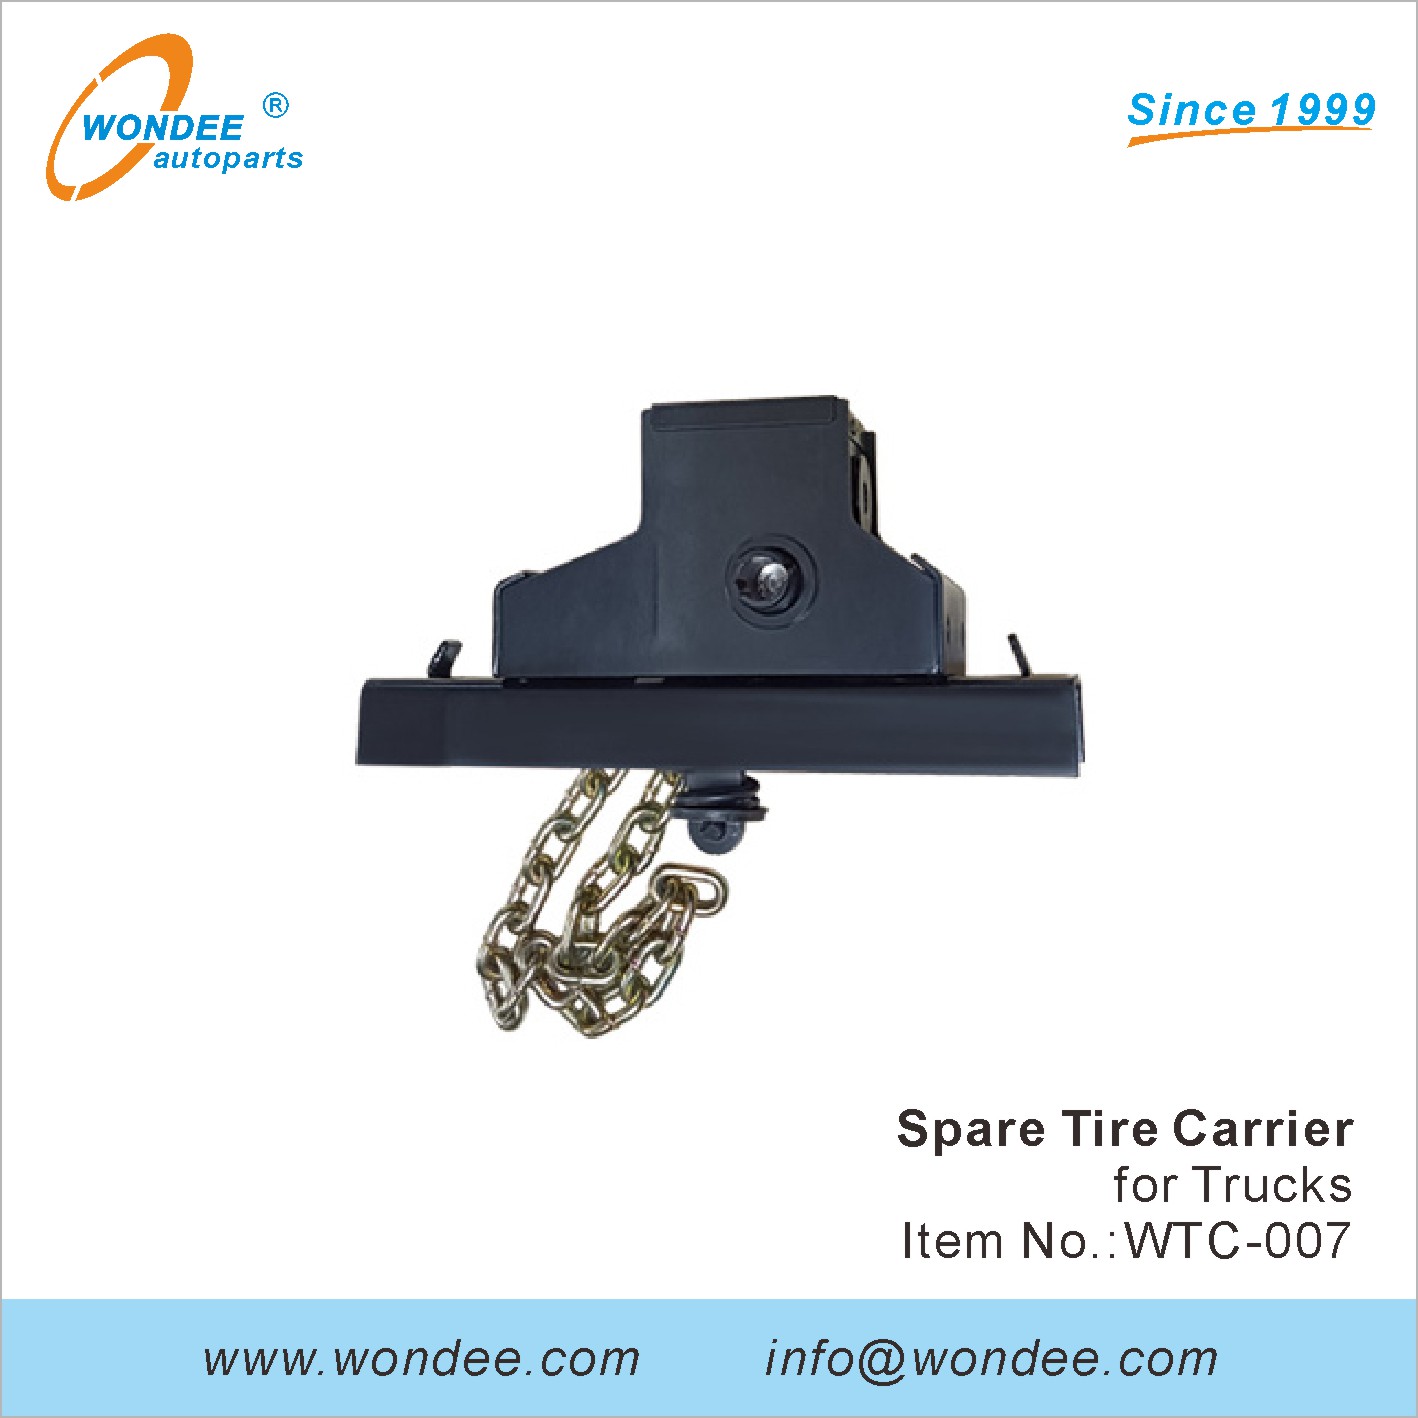 WONDEE spare tire carrier (7)